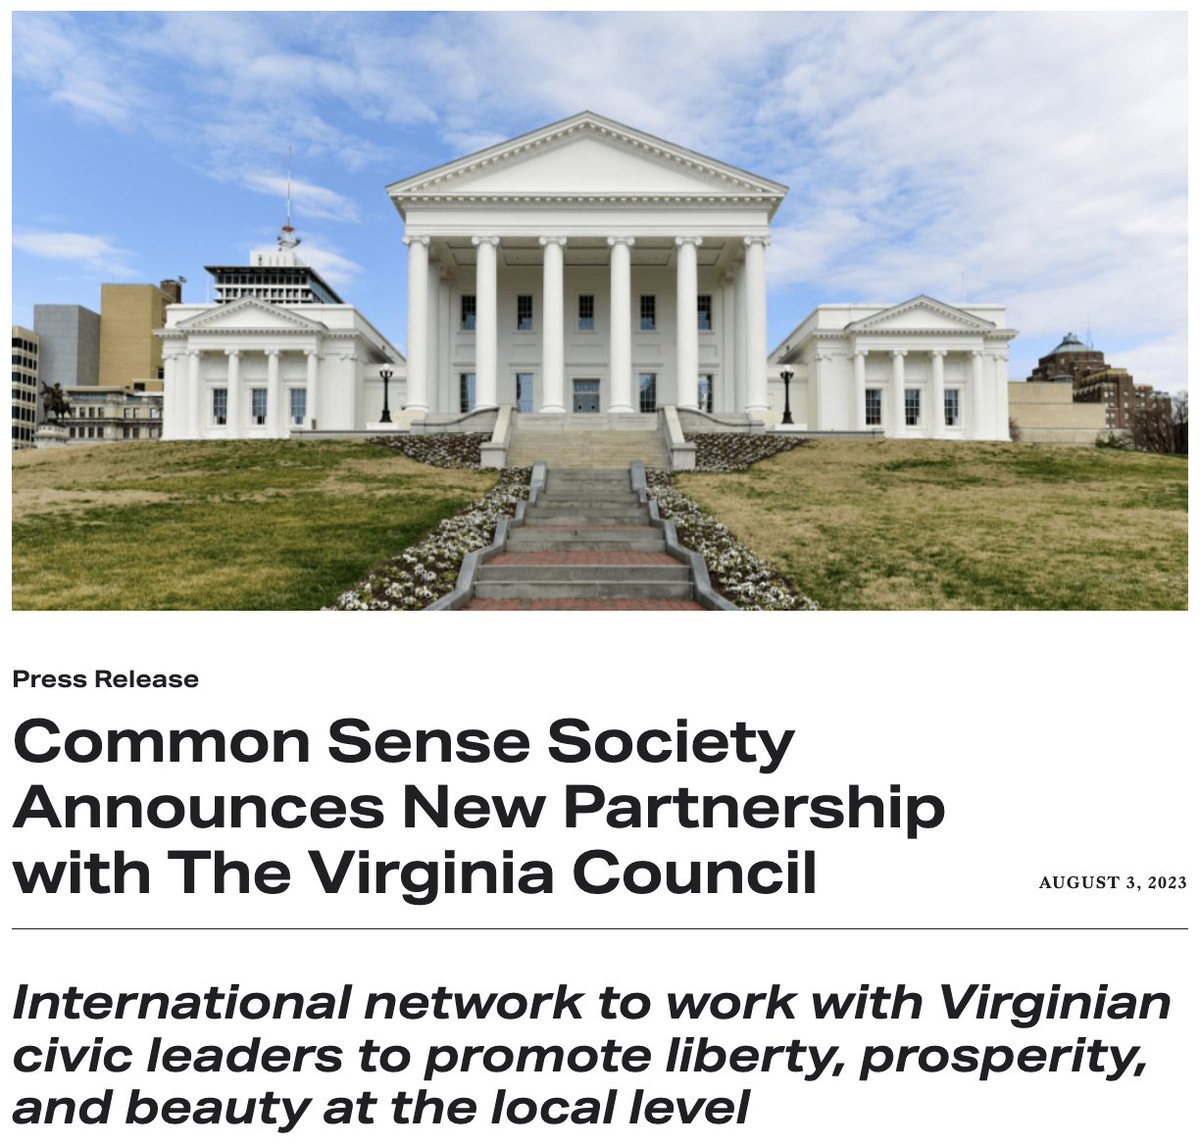 '@VA_Council educates the public on the significance of historic resources and provides a space where Virginians can build a society that learns from the past while paving a way to the future. We are honored to play a part in their mission.' — CSS president and C.E.O.